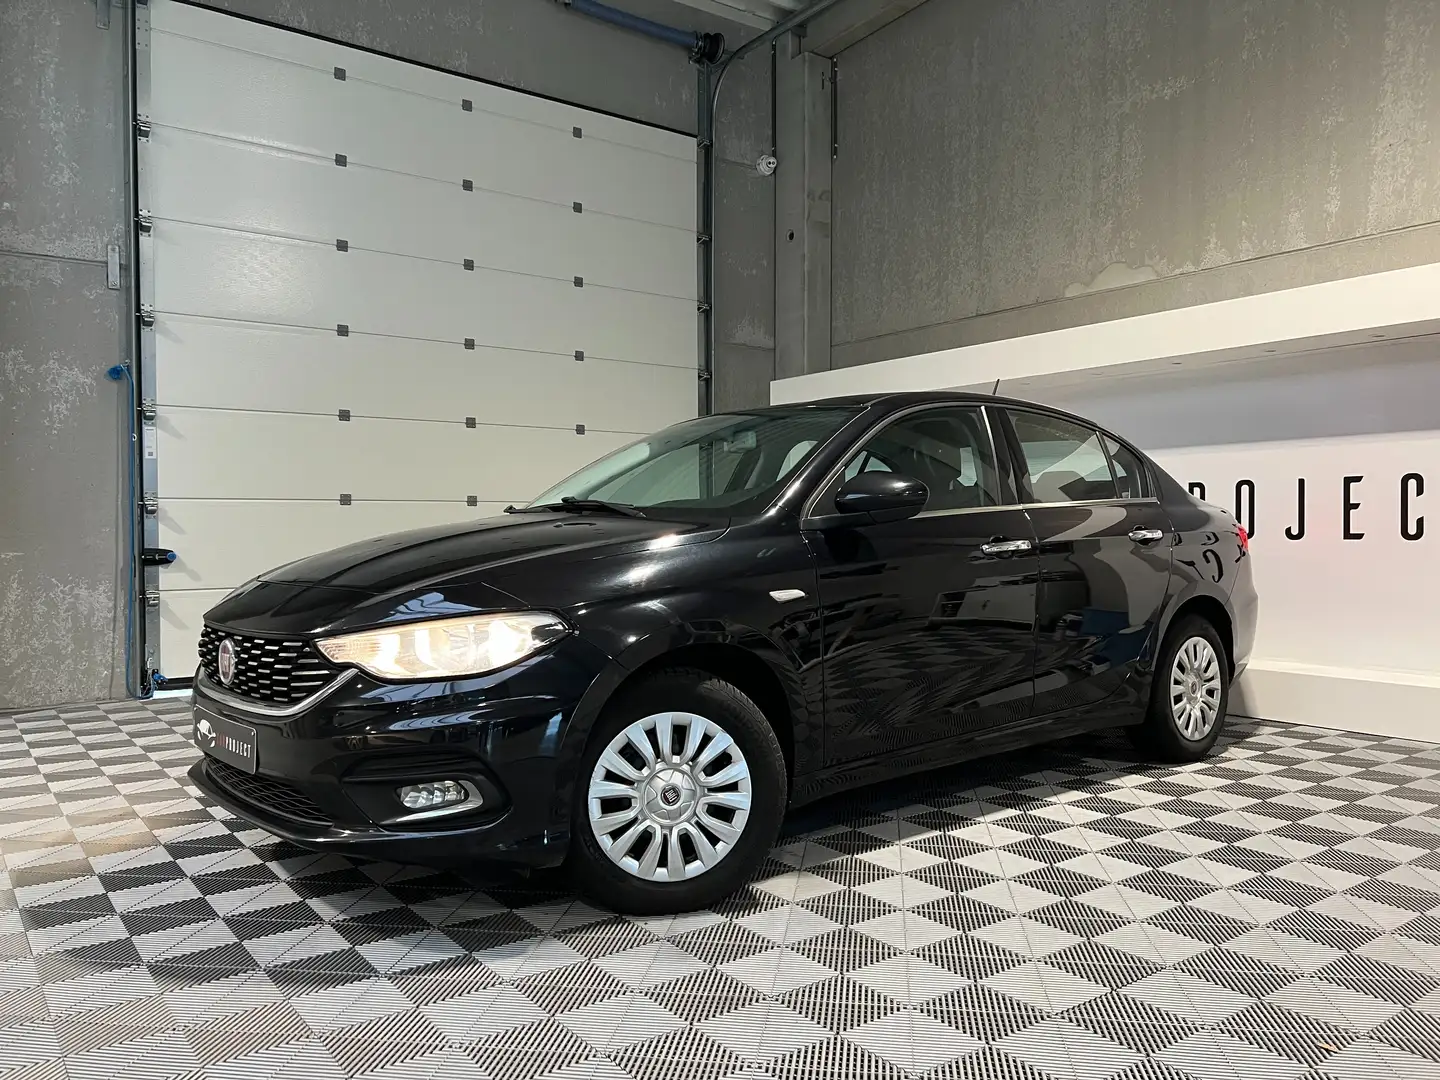 Fiat Tipo 1.3 MultiJet **MARCHAND OU EXPORT** crna - 1